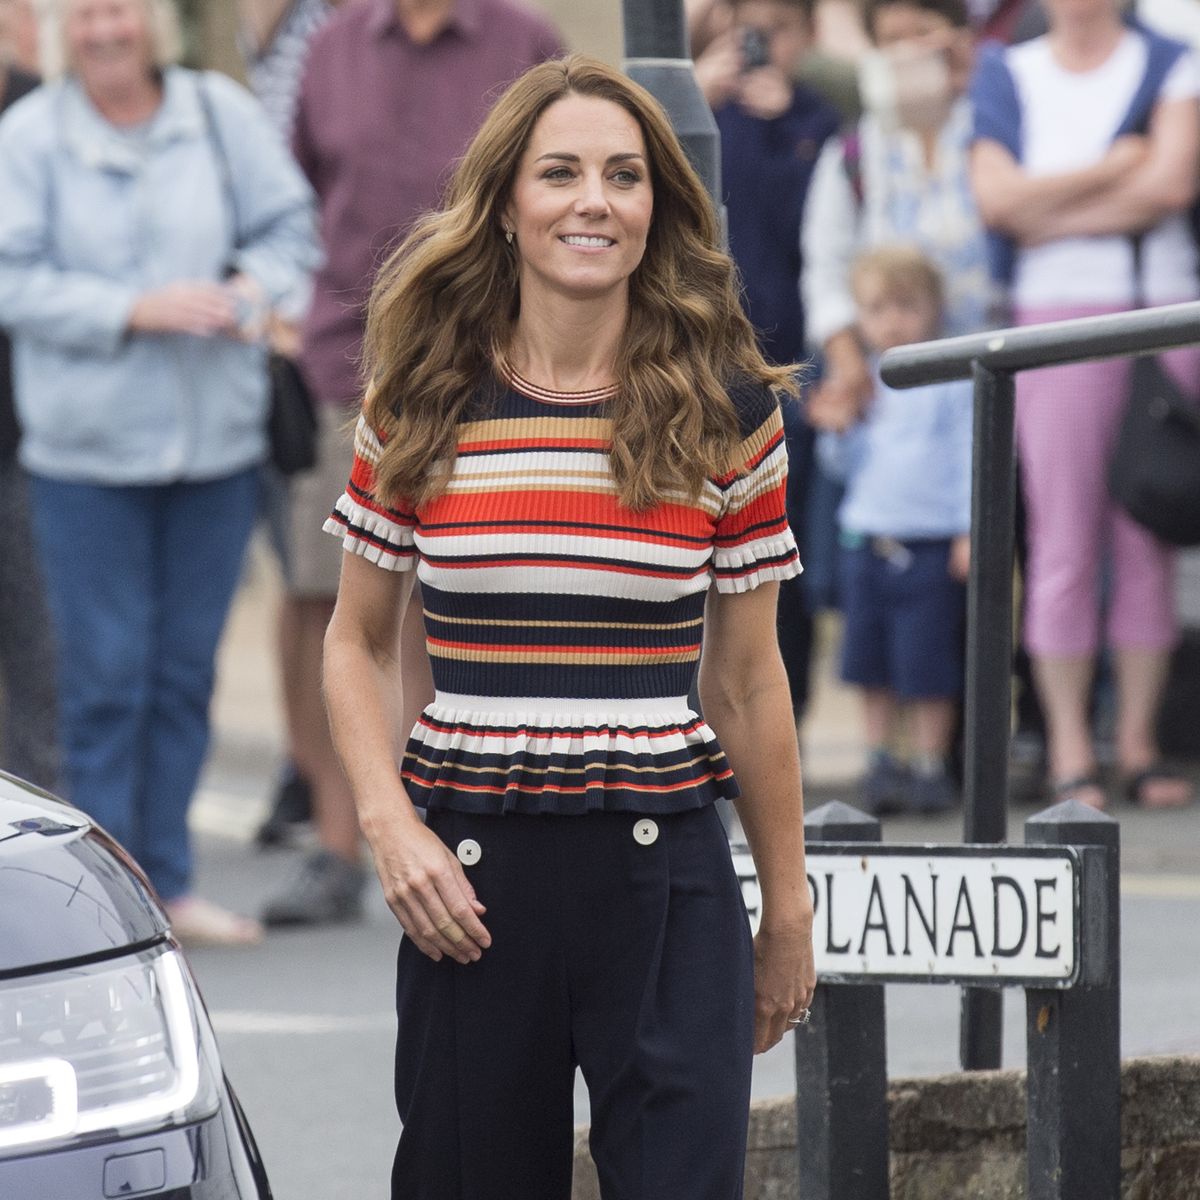 Kate Middleton Wore Superga's Cotu Sneakers for the King's Cup - Cotu Sneakers